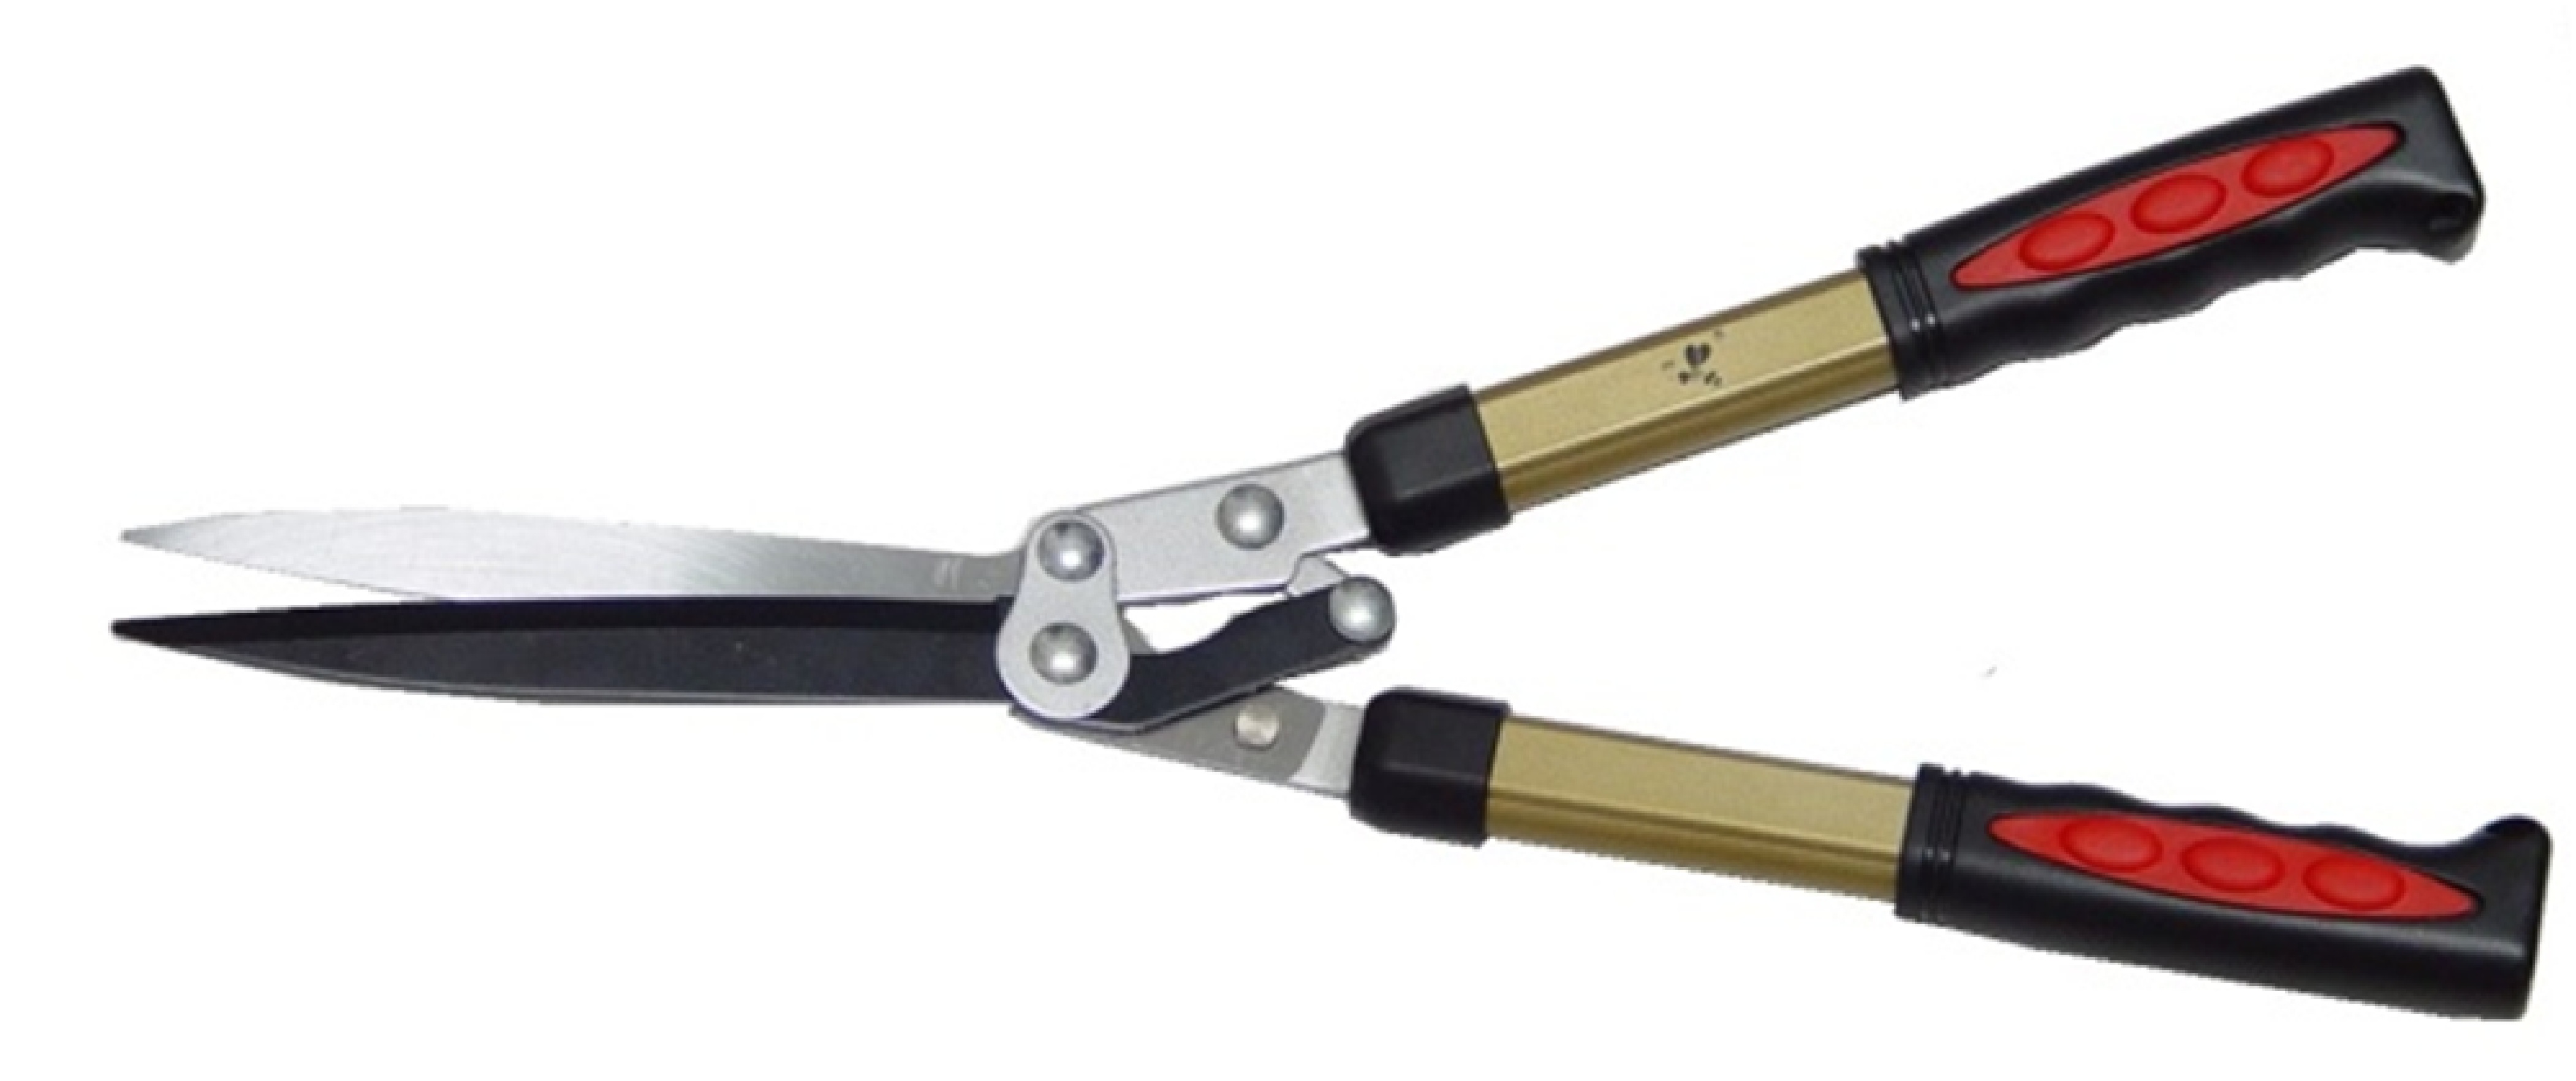 58.5cm Lever Action Straight Hedge Shears